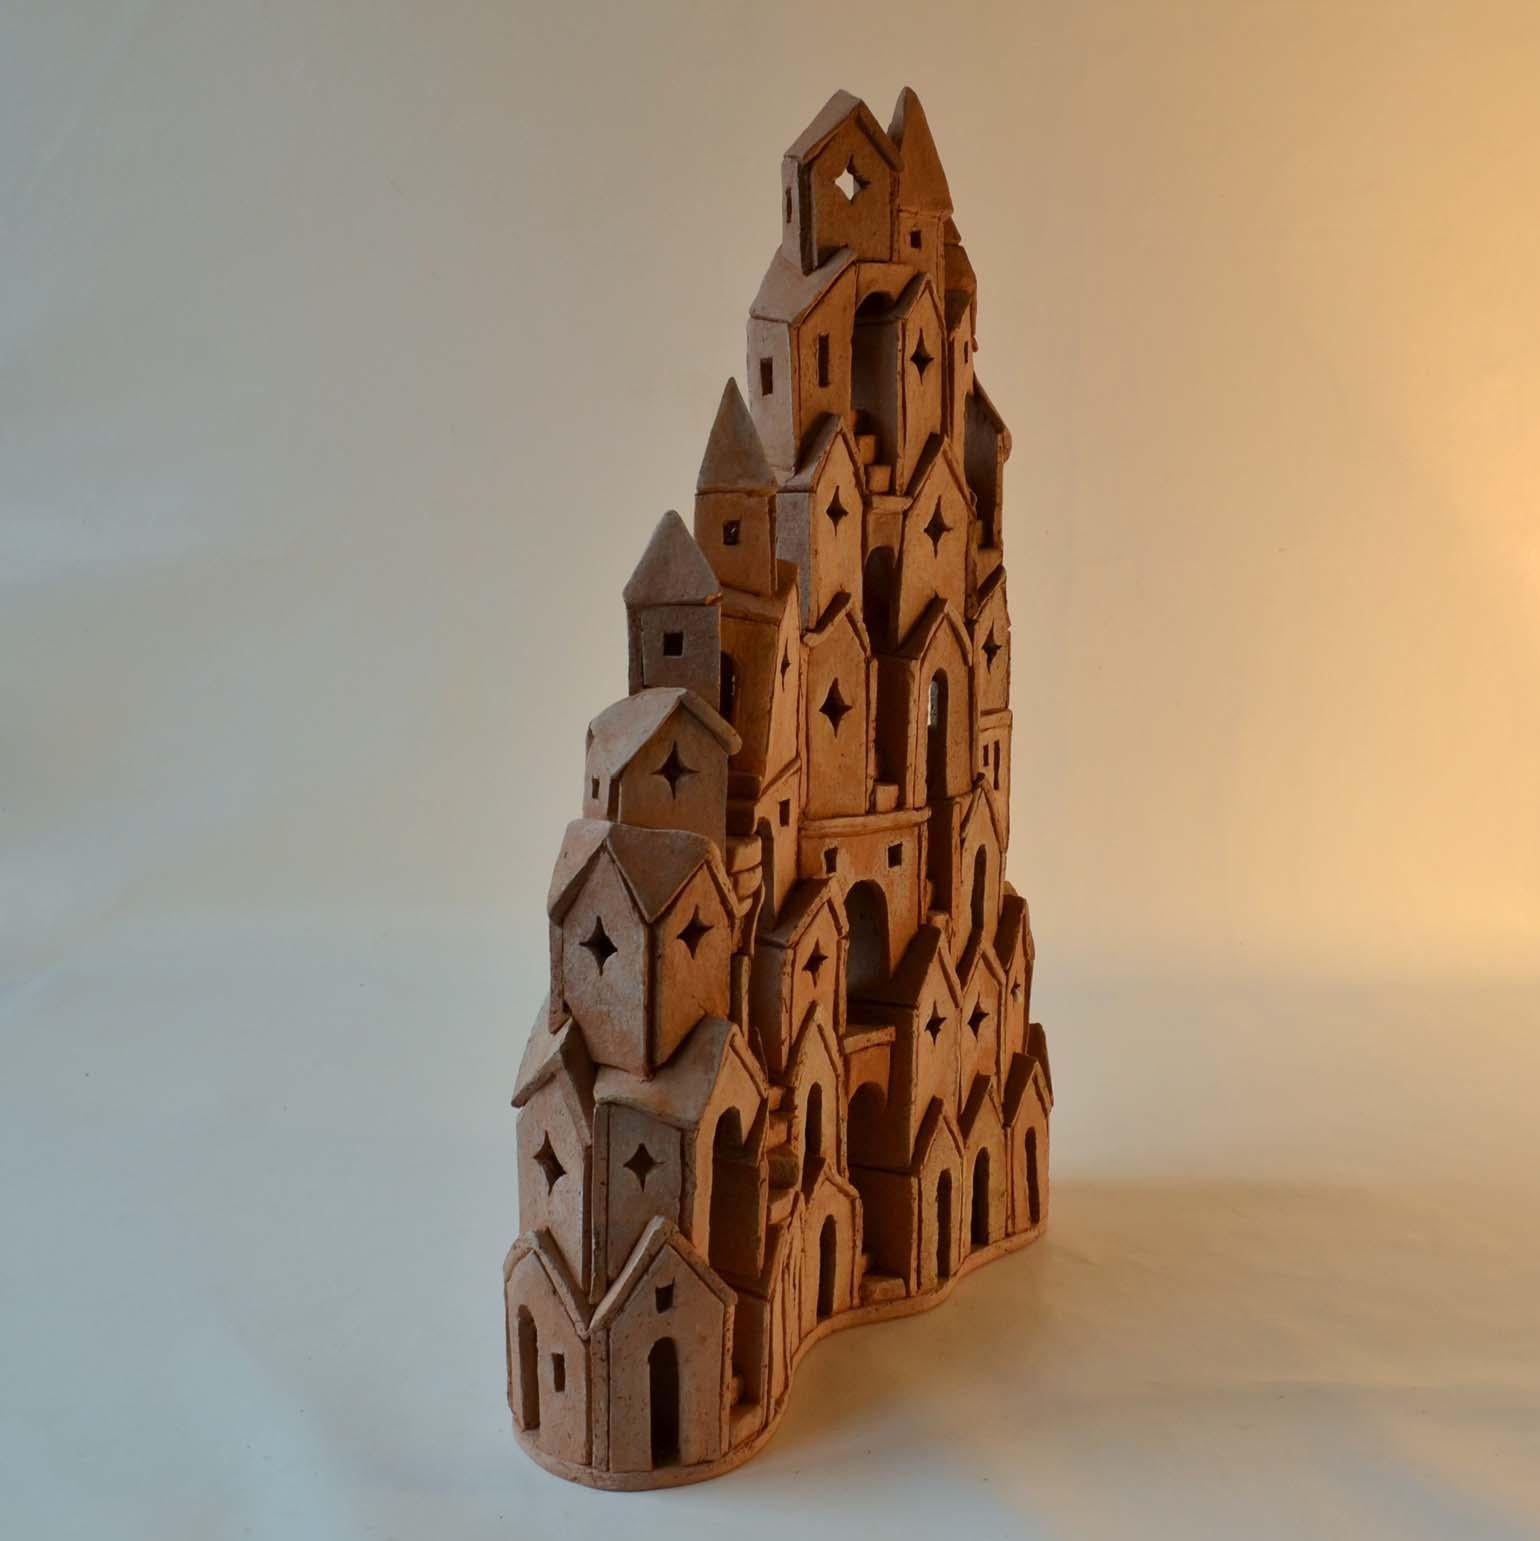 Architectural Surreal Ceramic Tower Sculpture 2 by Dutch Arie Bouter 1995 4